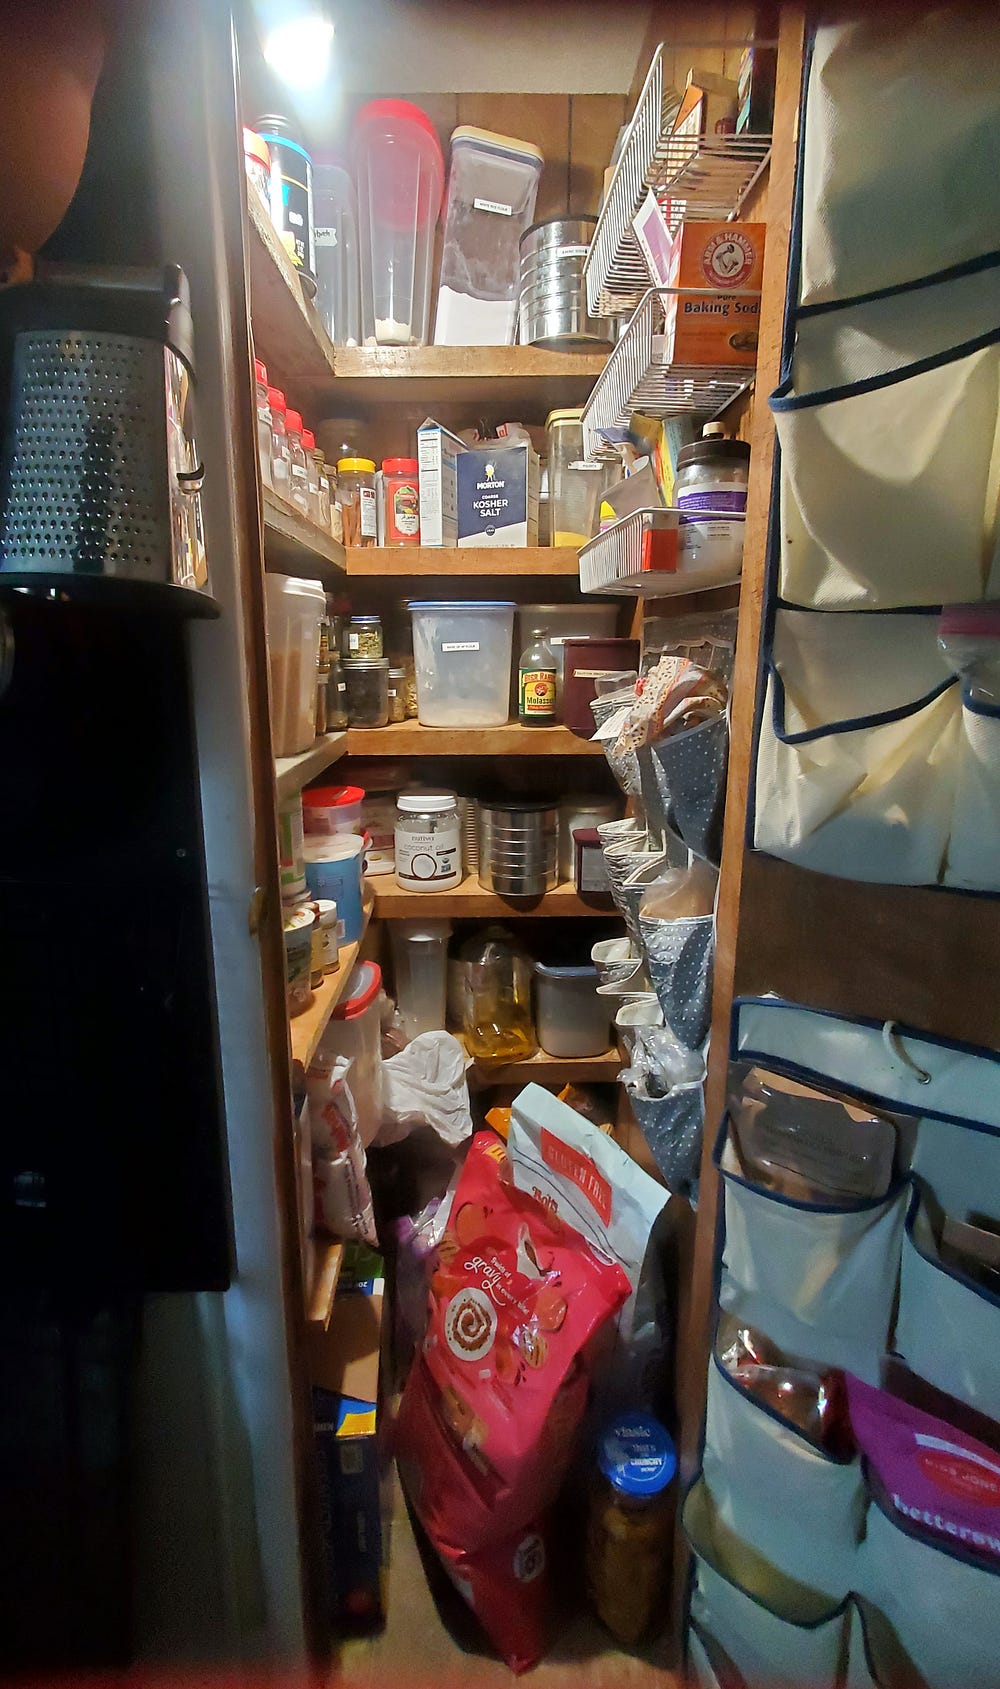 A narrow pantry with a light in the upper left. There are shelves in the back and on the left side. On the right on the wall is a white wire shelf unit and hanging pocket shoe storage. Similar shoe hanging storage is attached to the pantry door. The shelves and hanging pockets are filled with pantry goods. Bags of dry cat food, boxes of garbage bags and other items are on the floor.